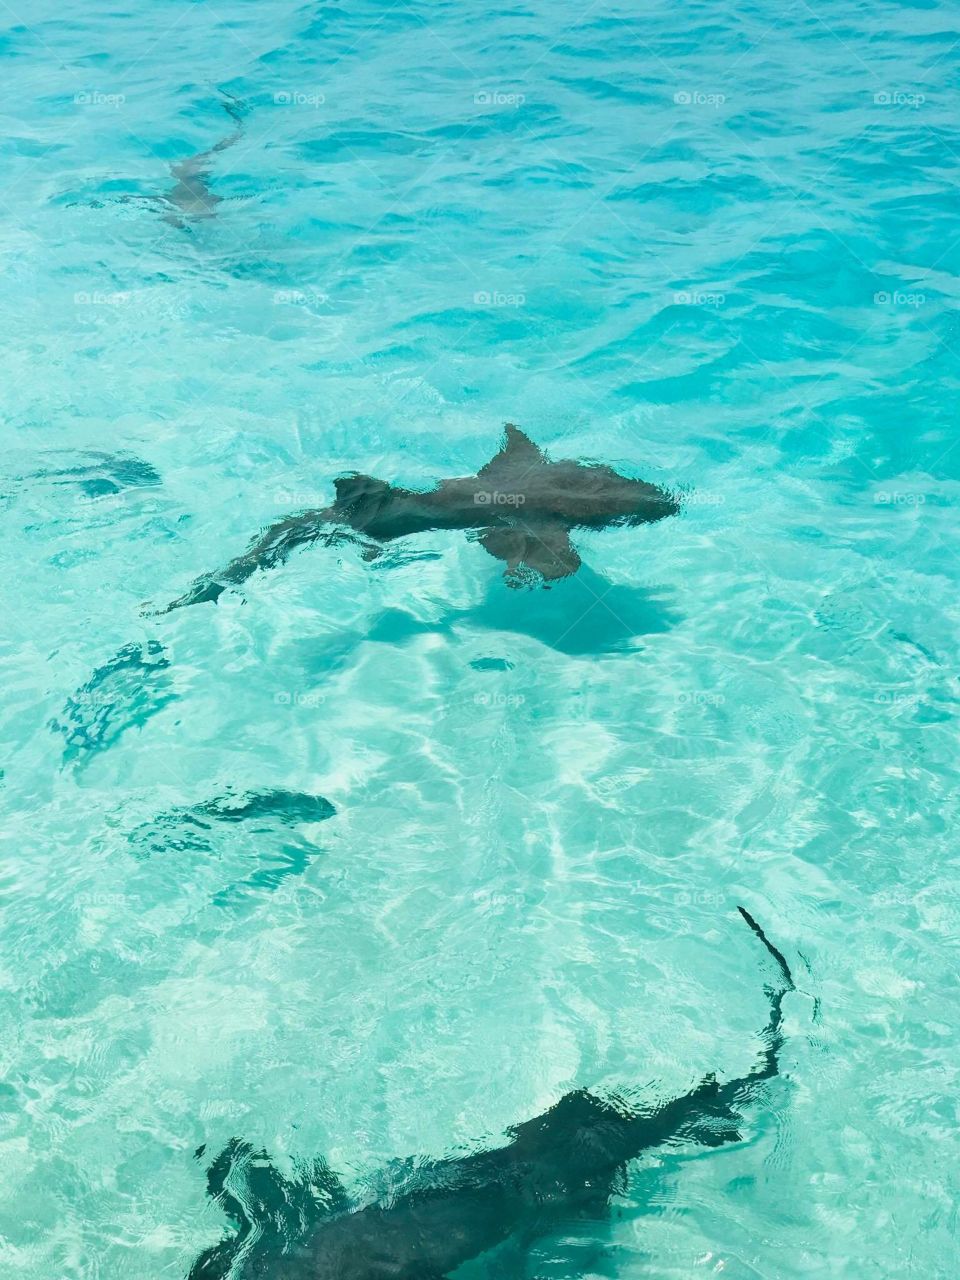 Sharks swimming in the beautiful turquoise waters of the Exuma islands.